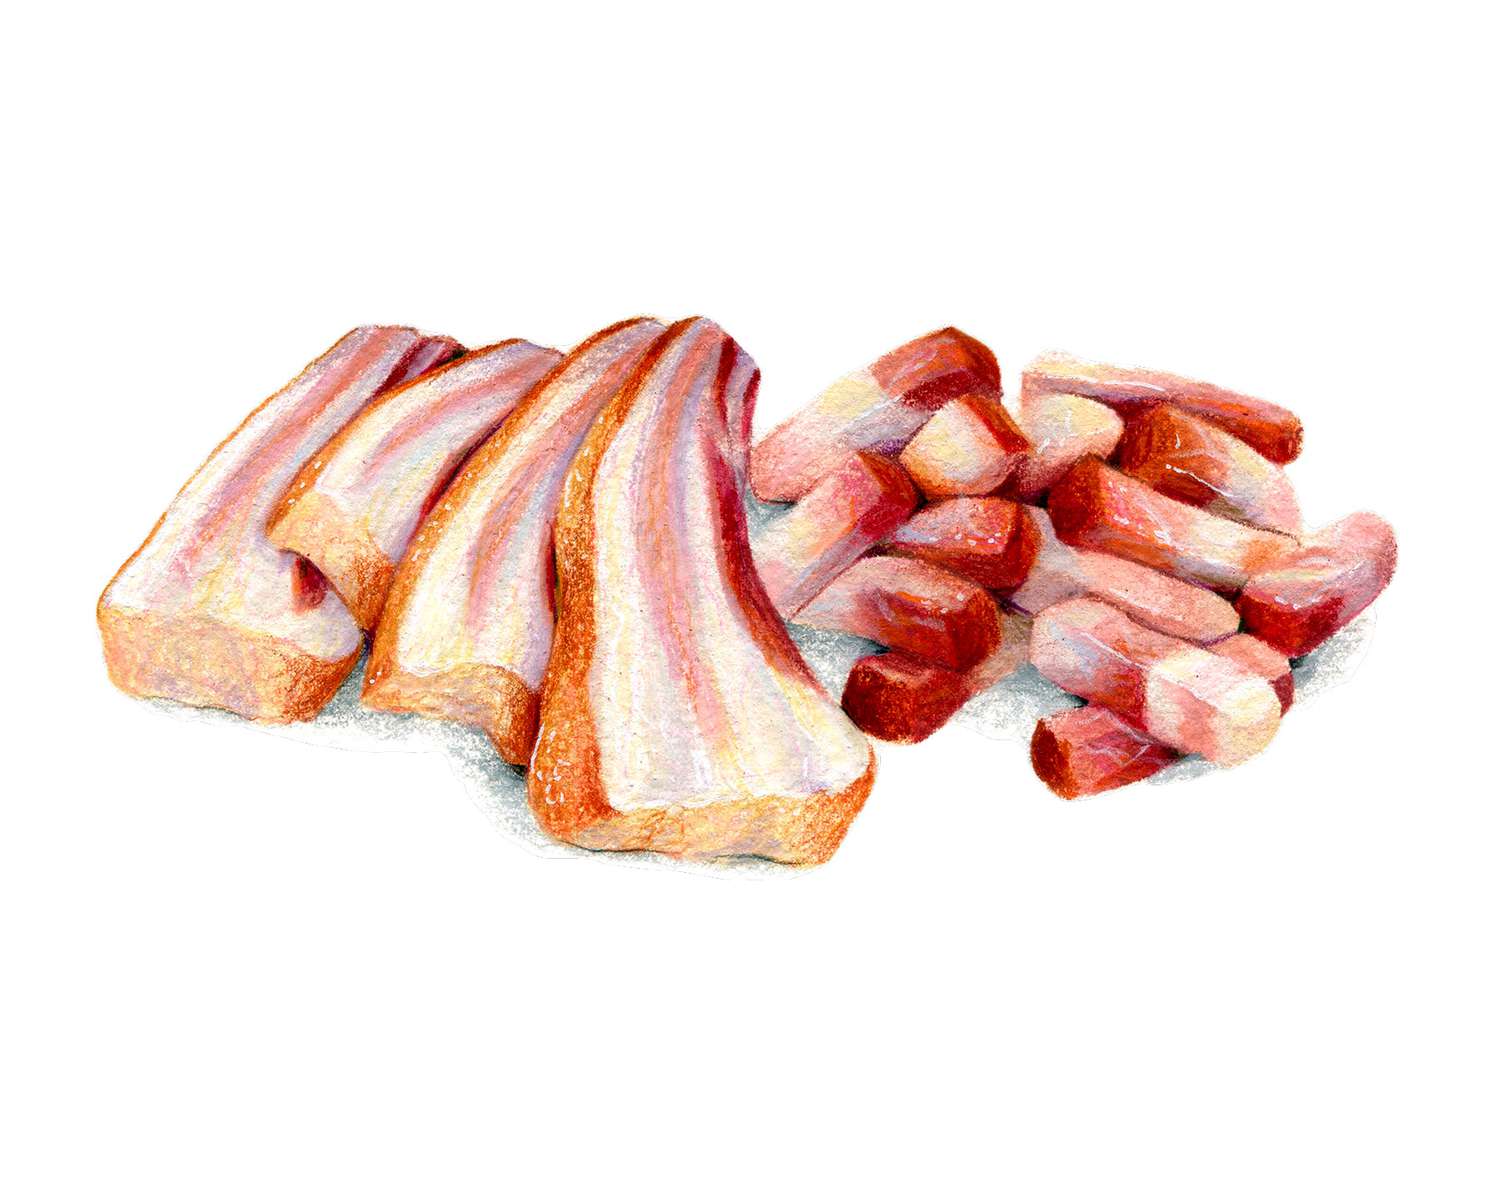 Types of bacon cuts - Thick-cut bacon